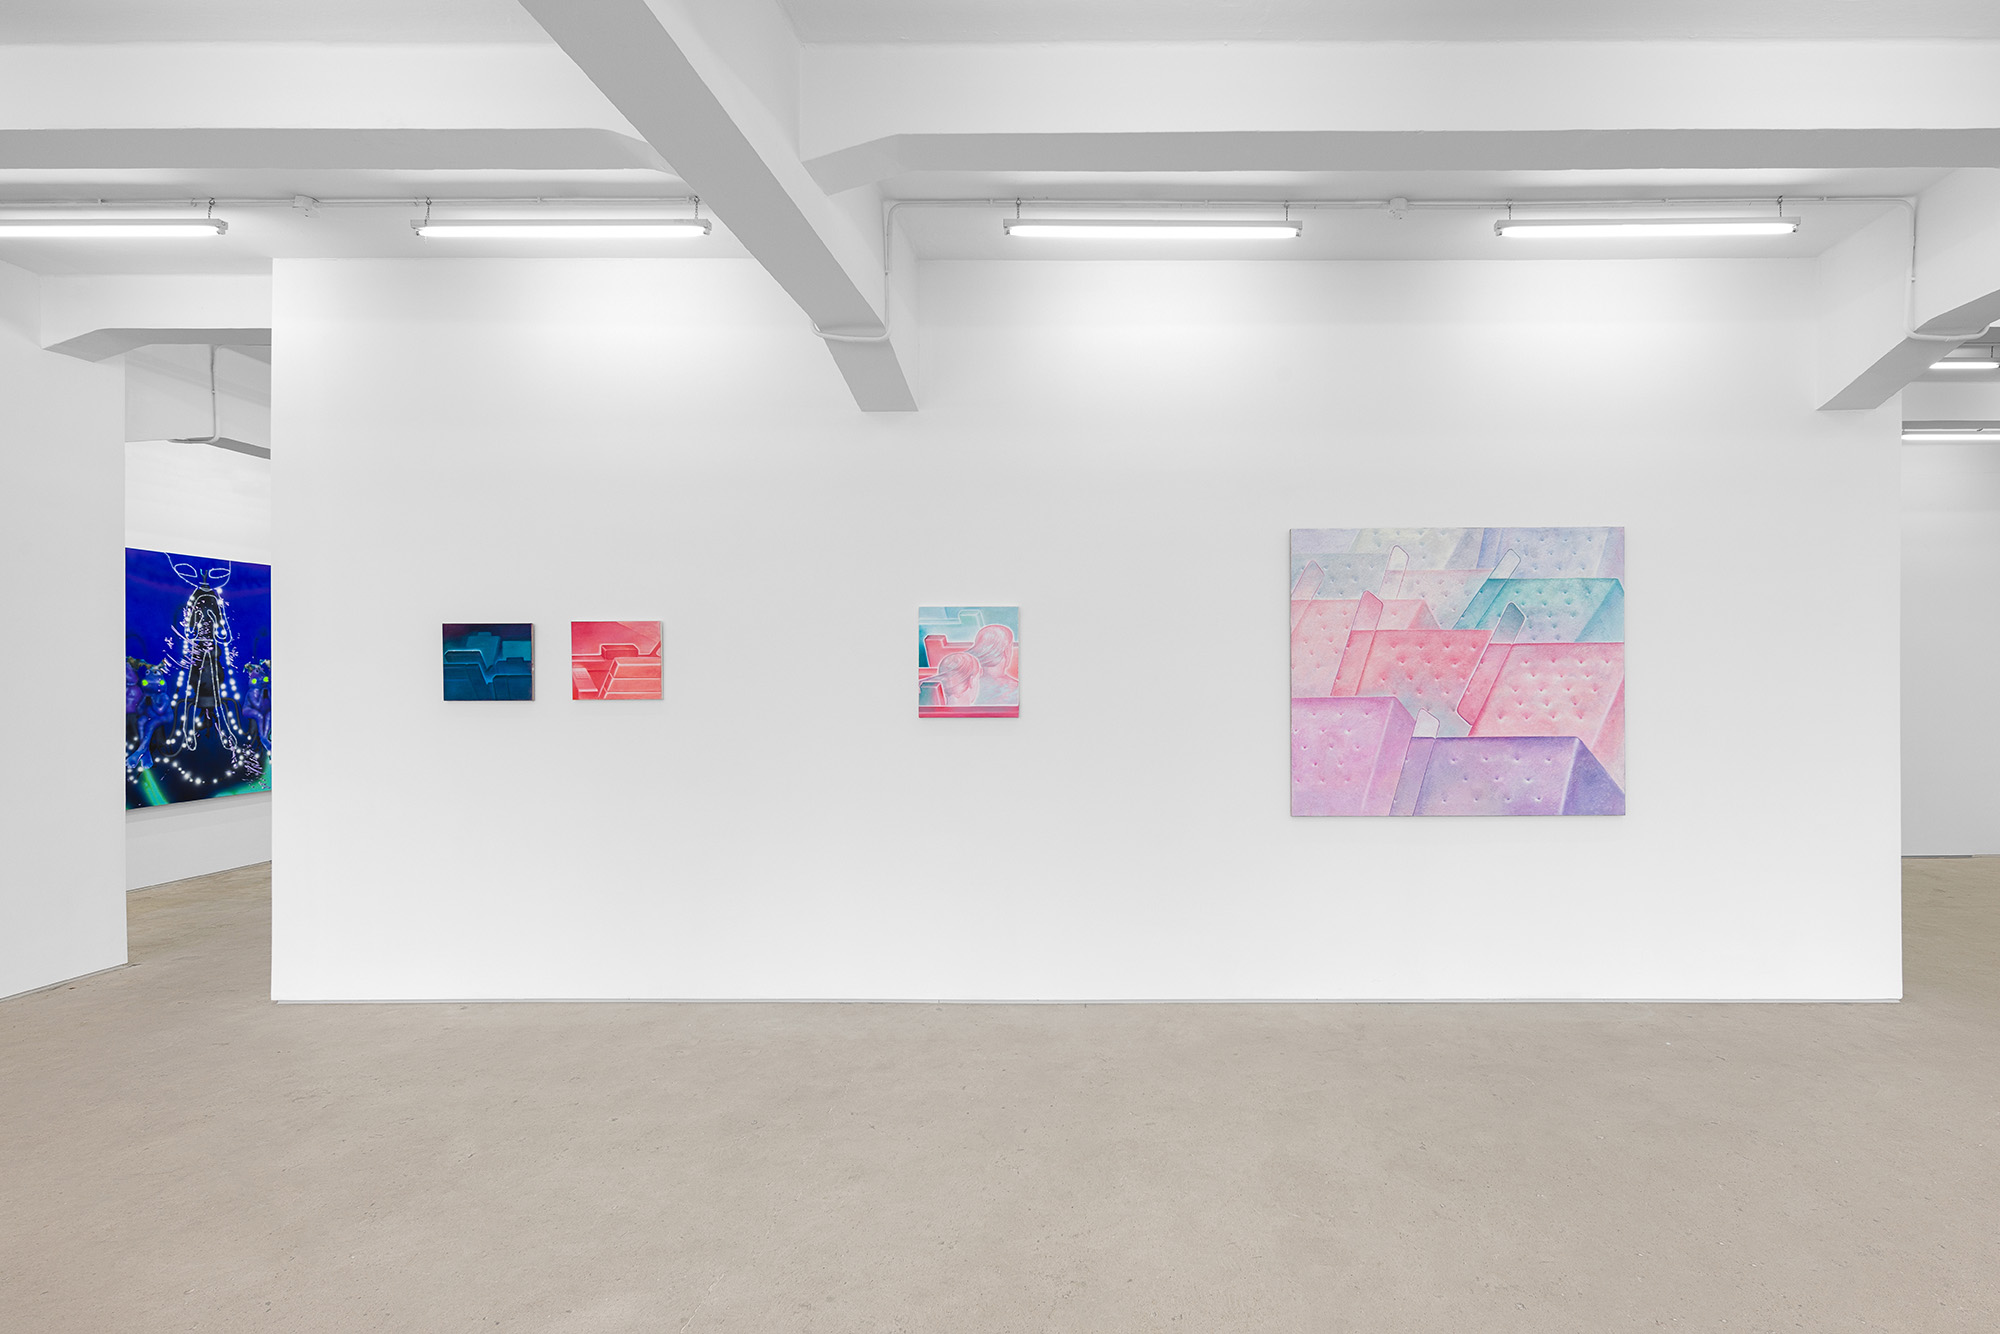 Installation view of group exhibition, Vacation II, at Gallery Vacancy, featuring works by Richard Burton and Rao Weiyi.